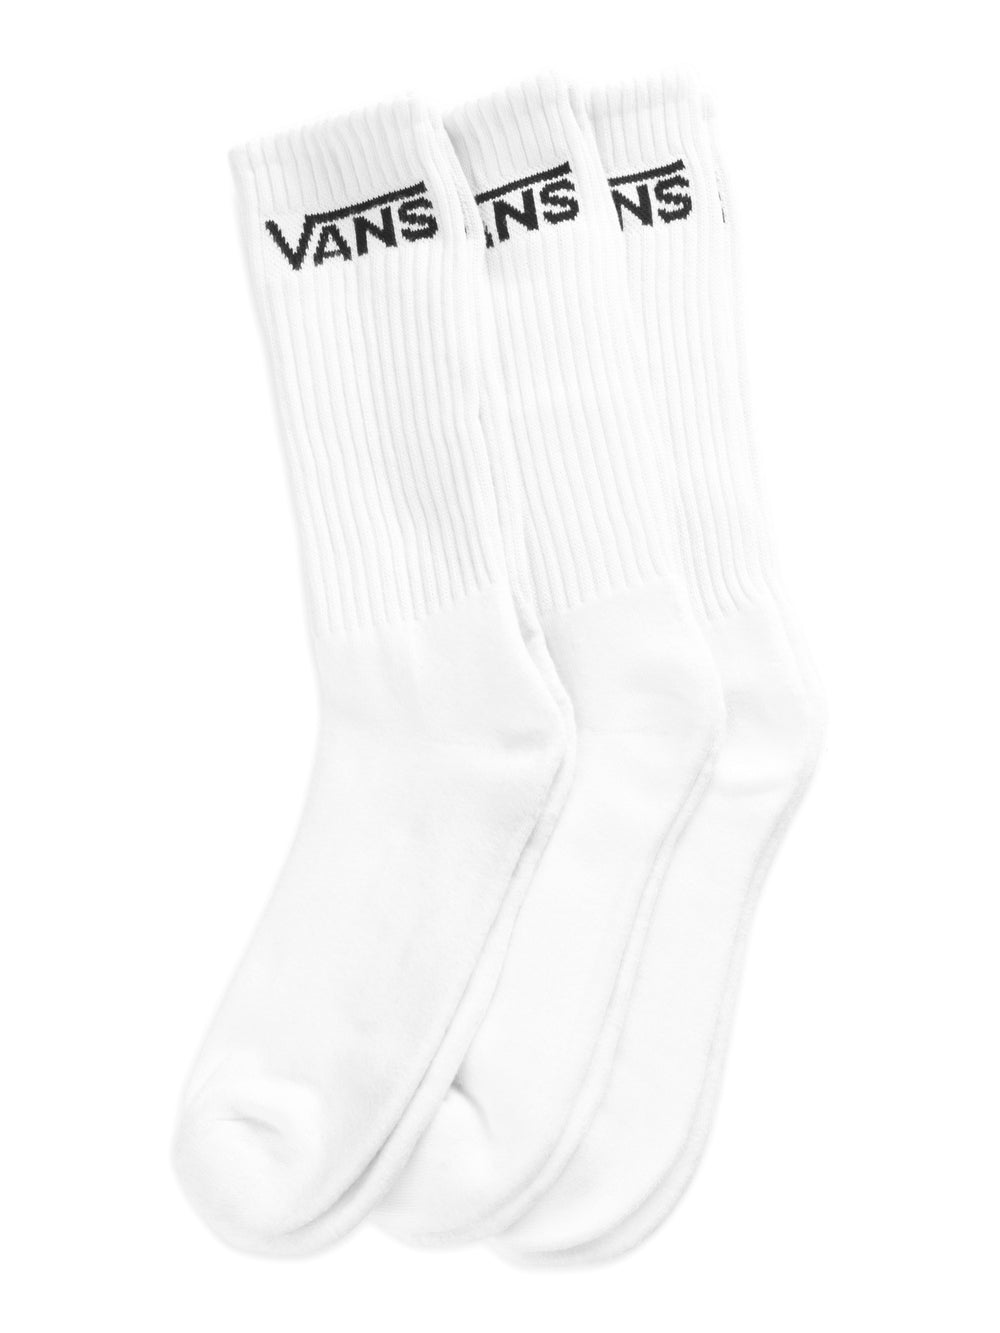 | Collective VANS CREW Boathouse 3 PACK CLASSIC Footwear SOCKS